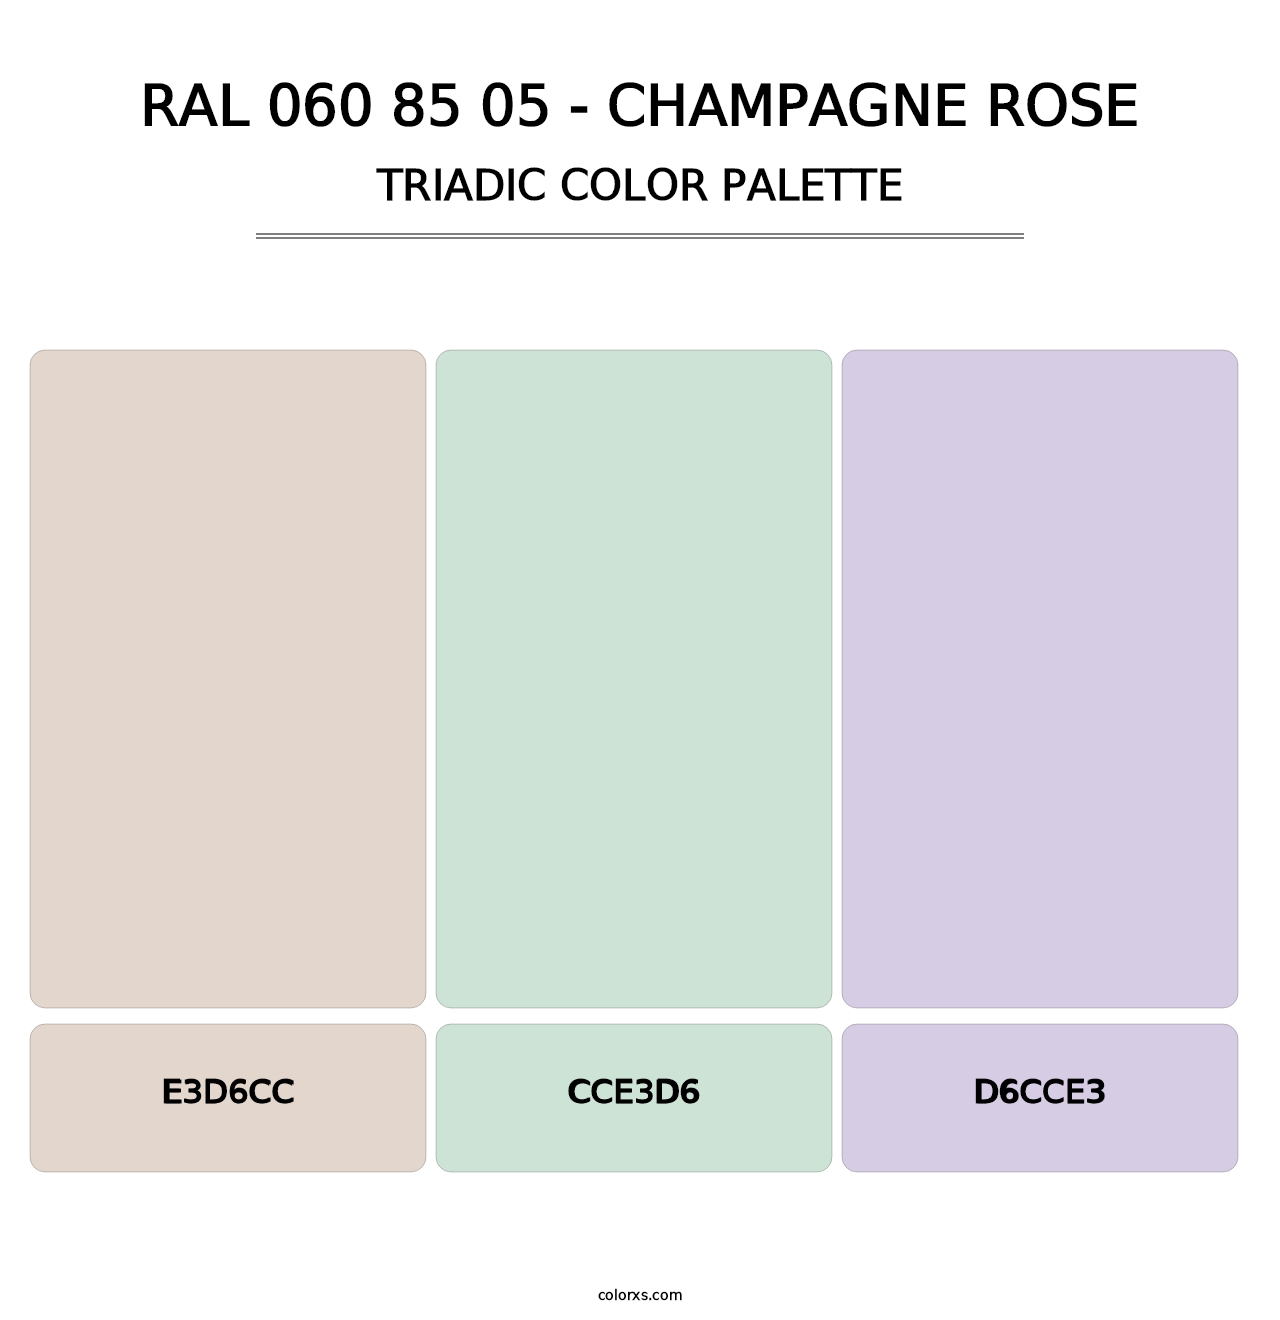 RAL 060 85 05 - Champagne Rose - Triadic Color Palette